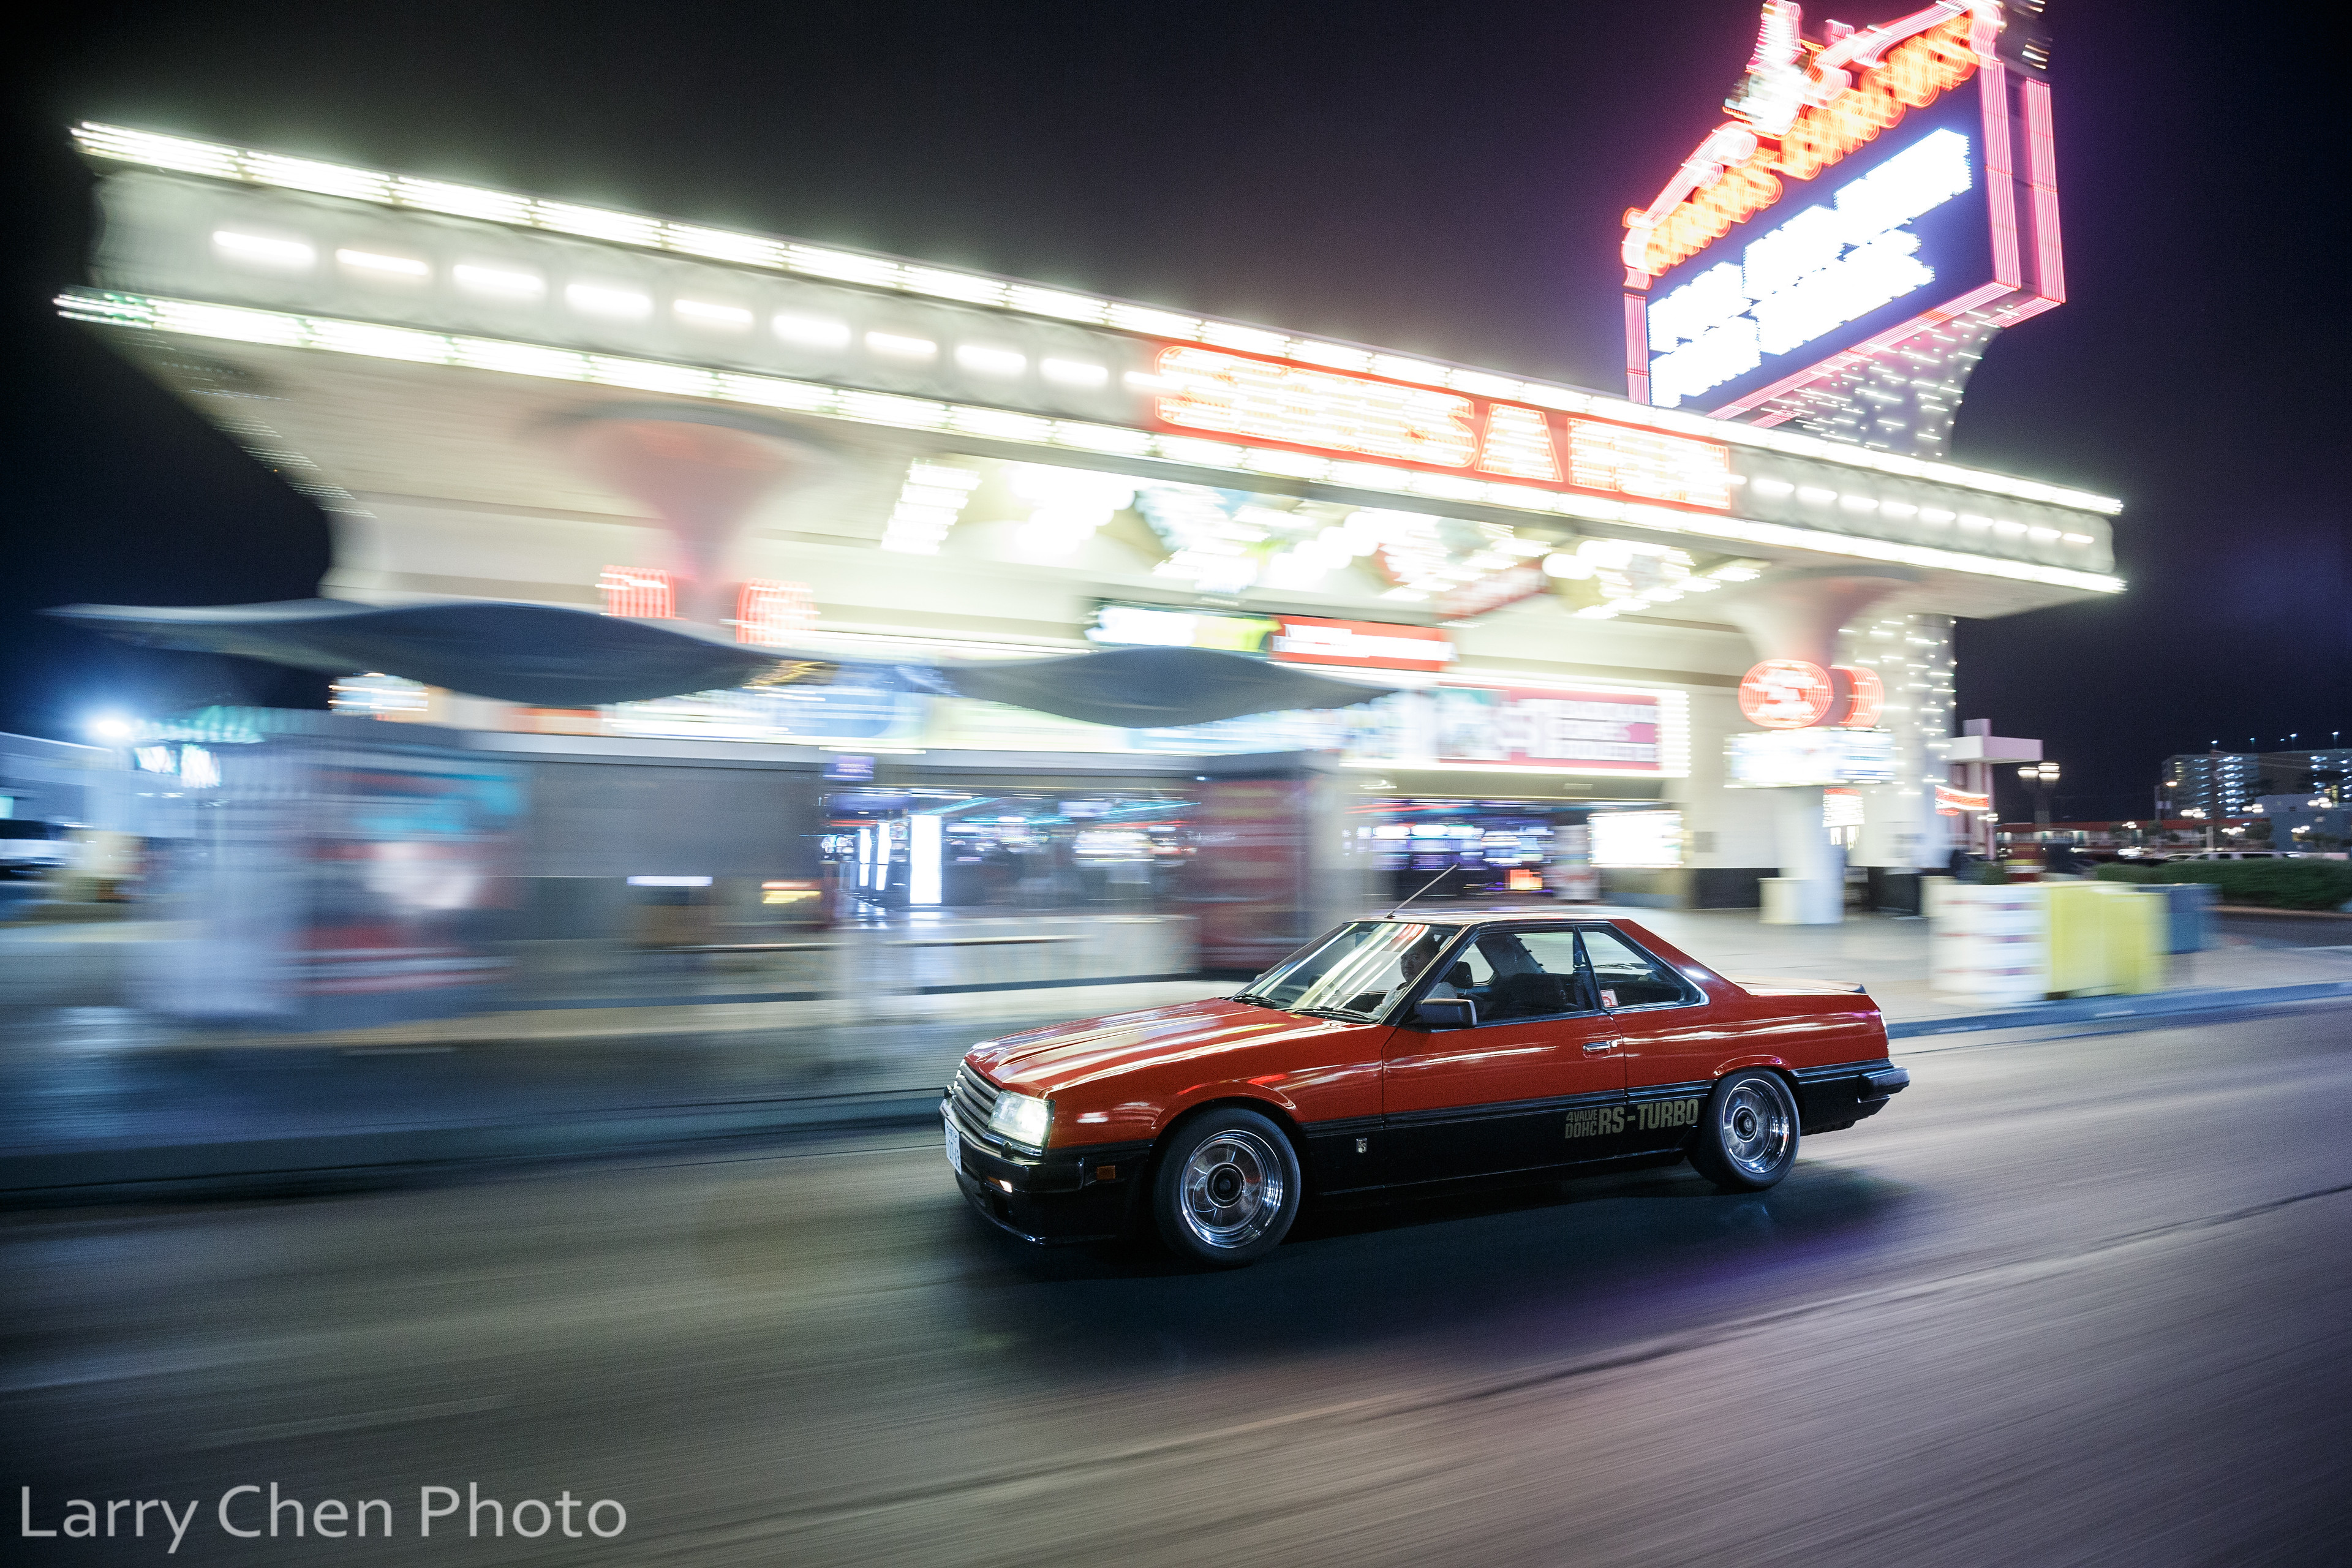 General 3840x2560 Nissan Skyline red cars Japanese cars night city lights sports car Larry Chen